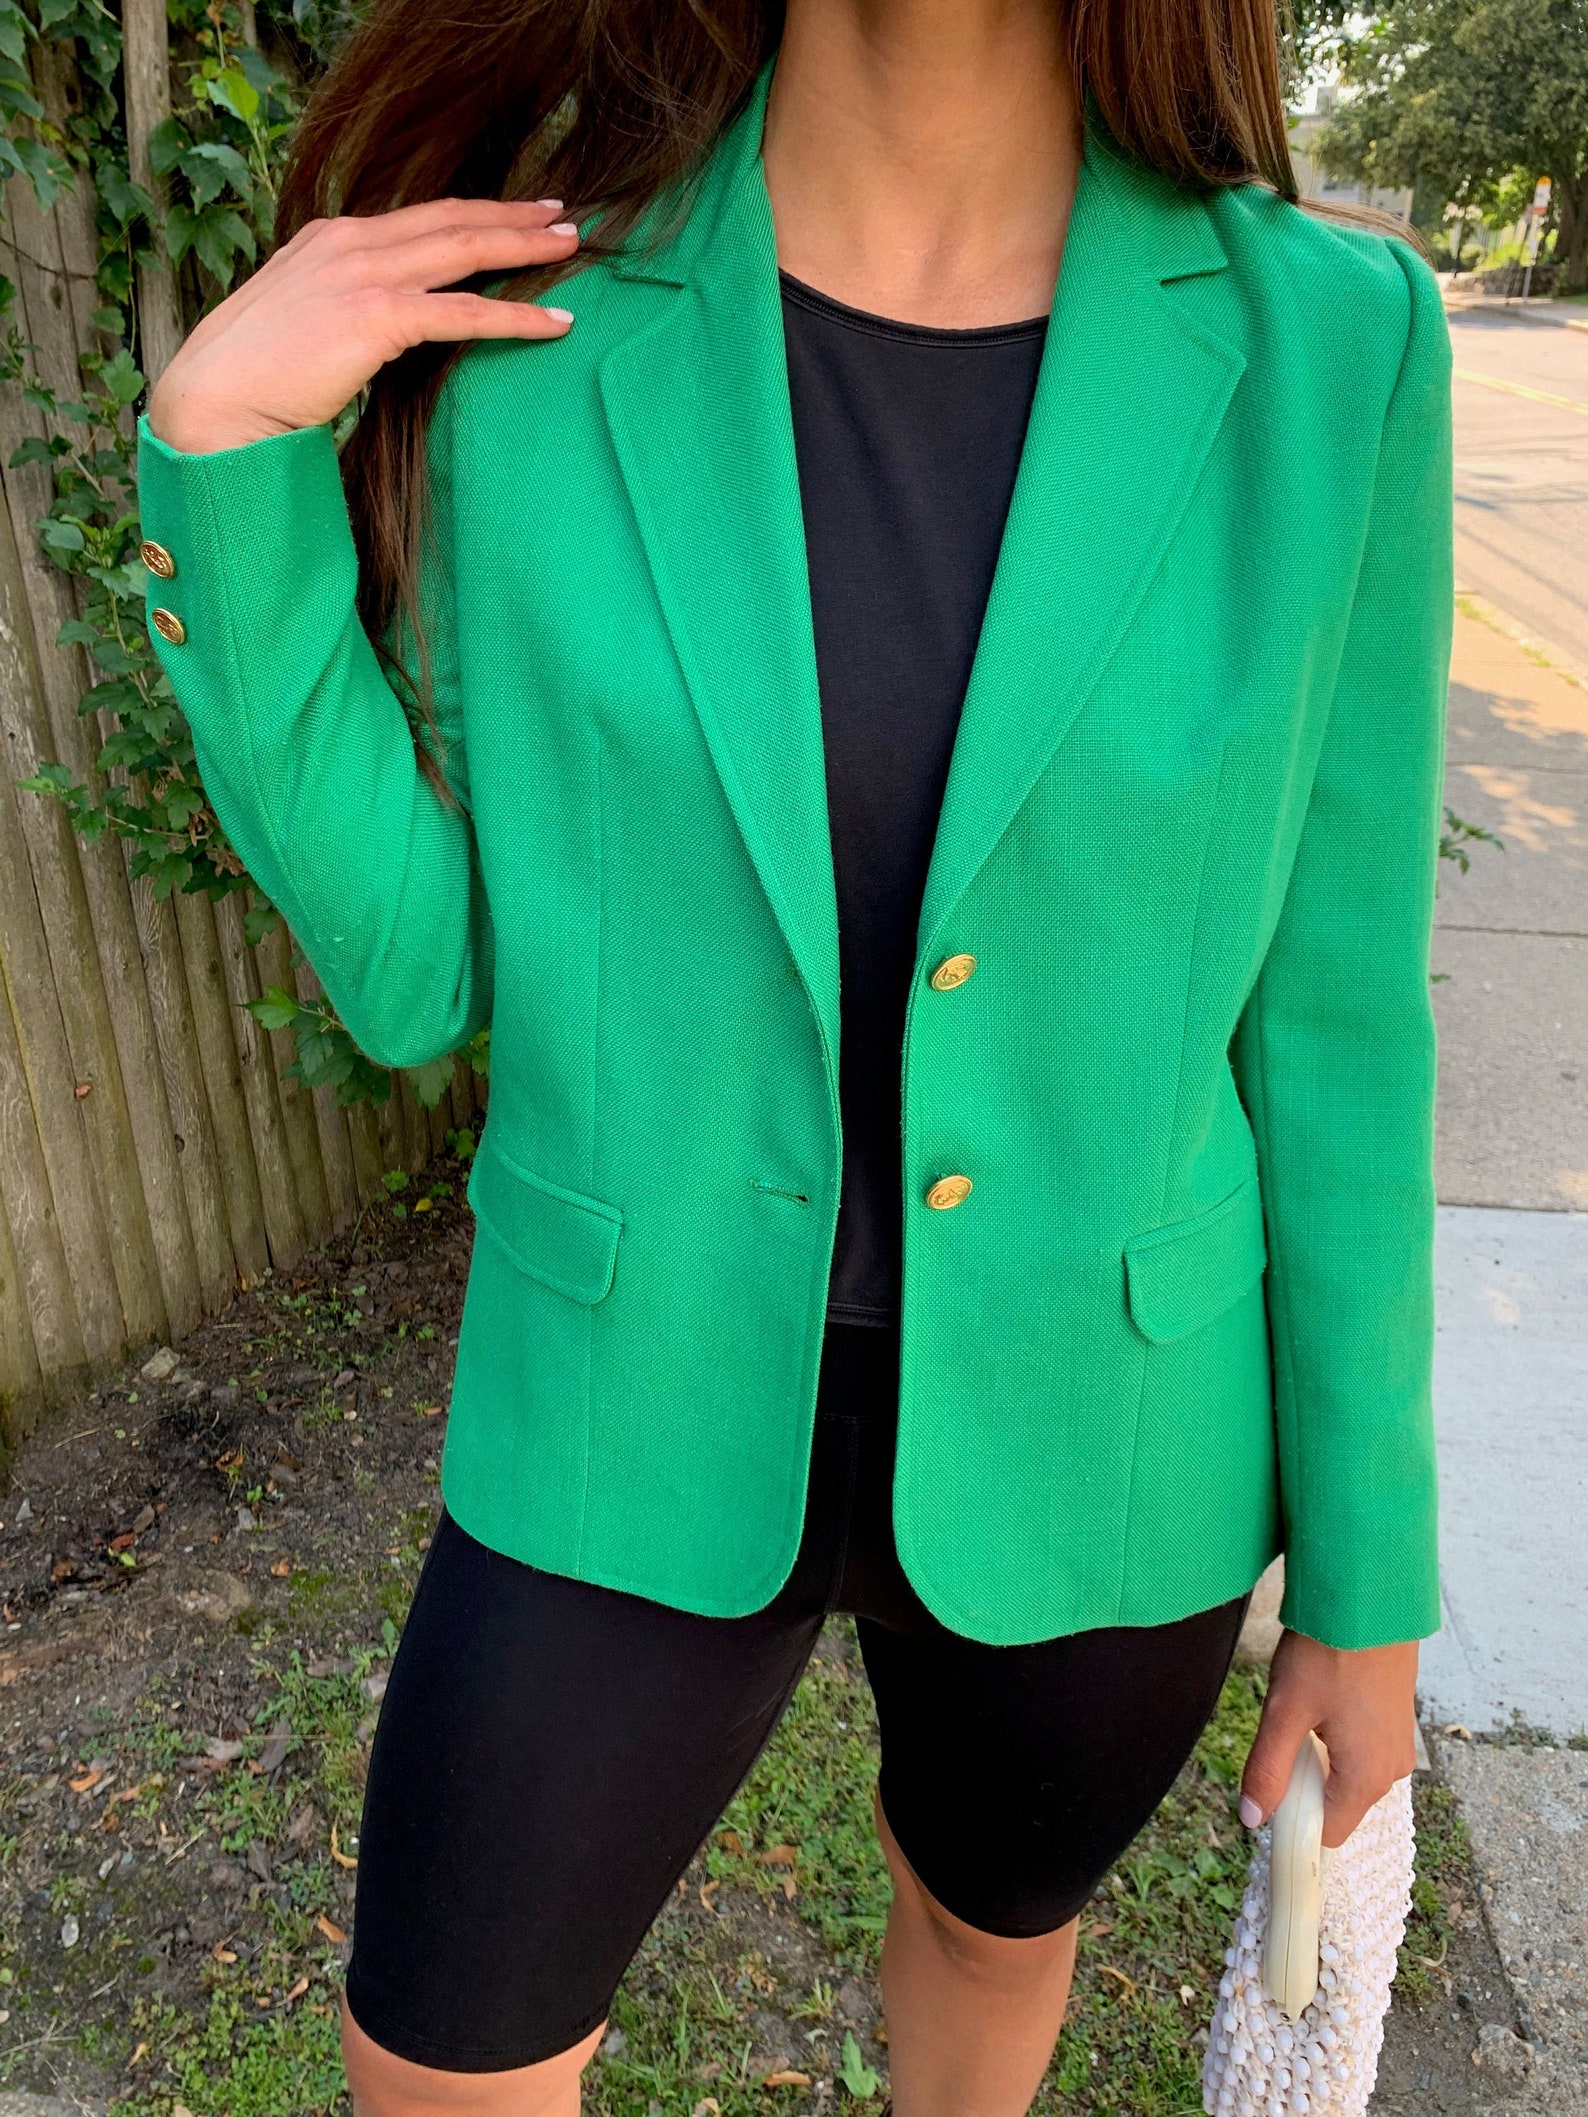 Vintage Filenes Kelly Green Blazer with Gold Buttons | Etsy